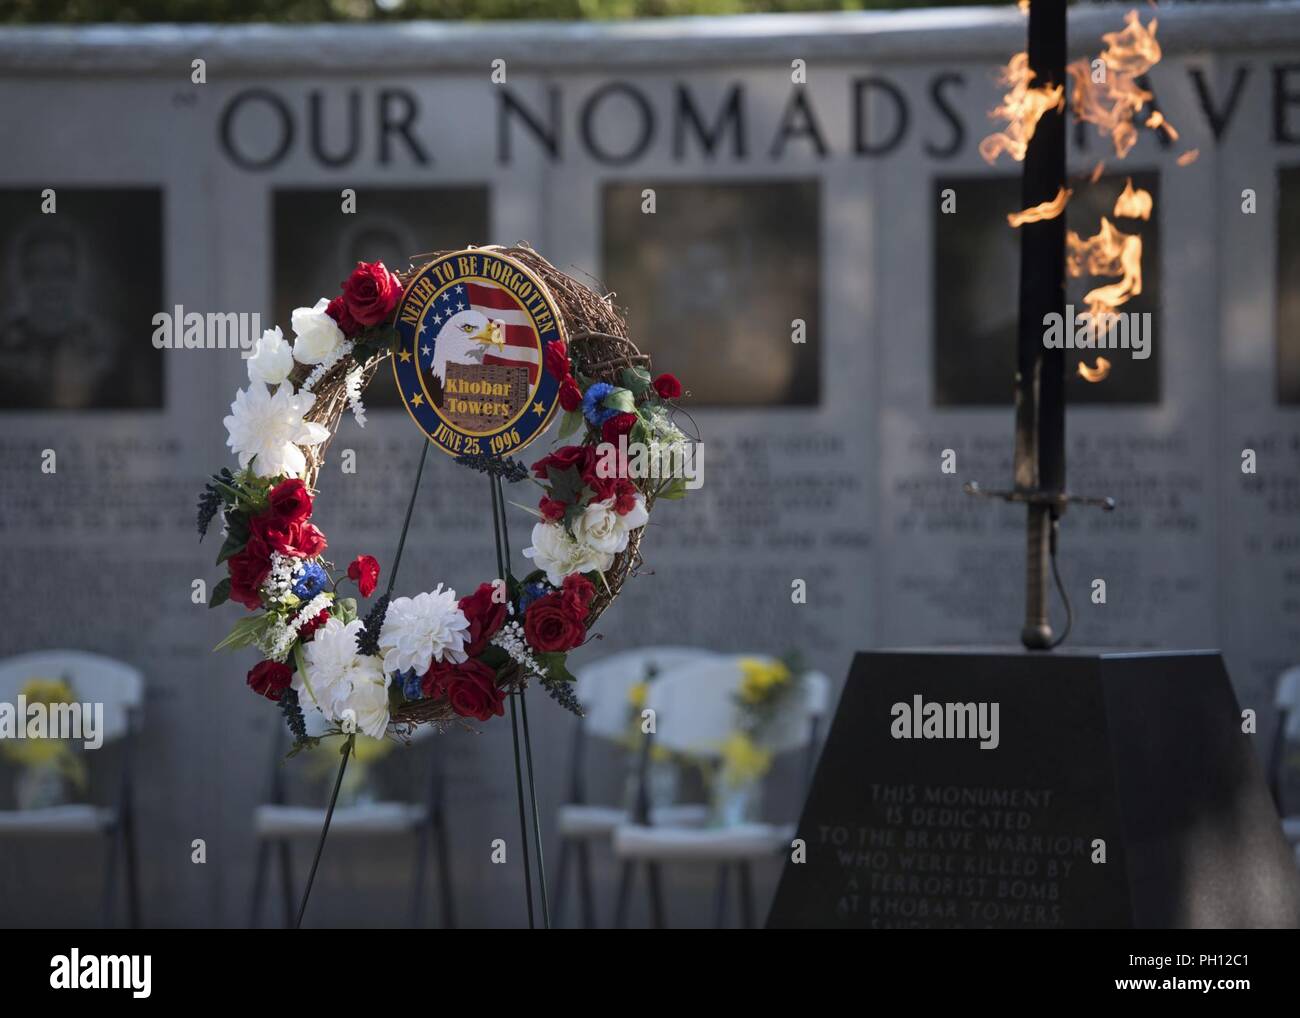 The 22nd anniversary of the Khobar Tower terrorist attack memorial ceremony was held June 25, 2018, at Eglin Air Force Base, Fla. Our Nomads have ceased their wandering but will never be forgotten. Stock Photo